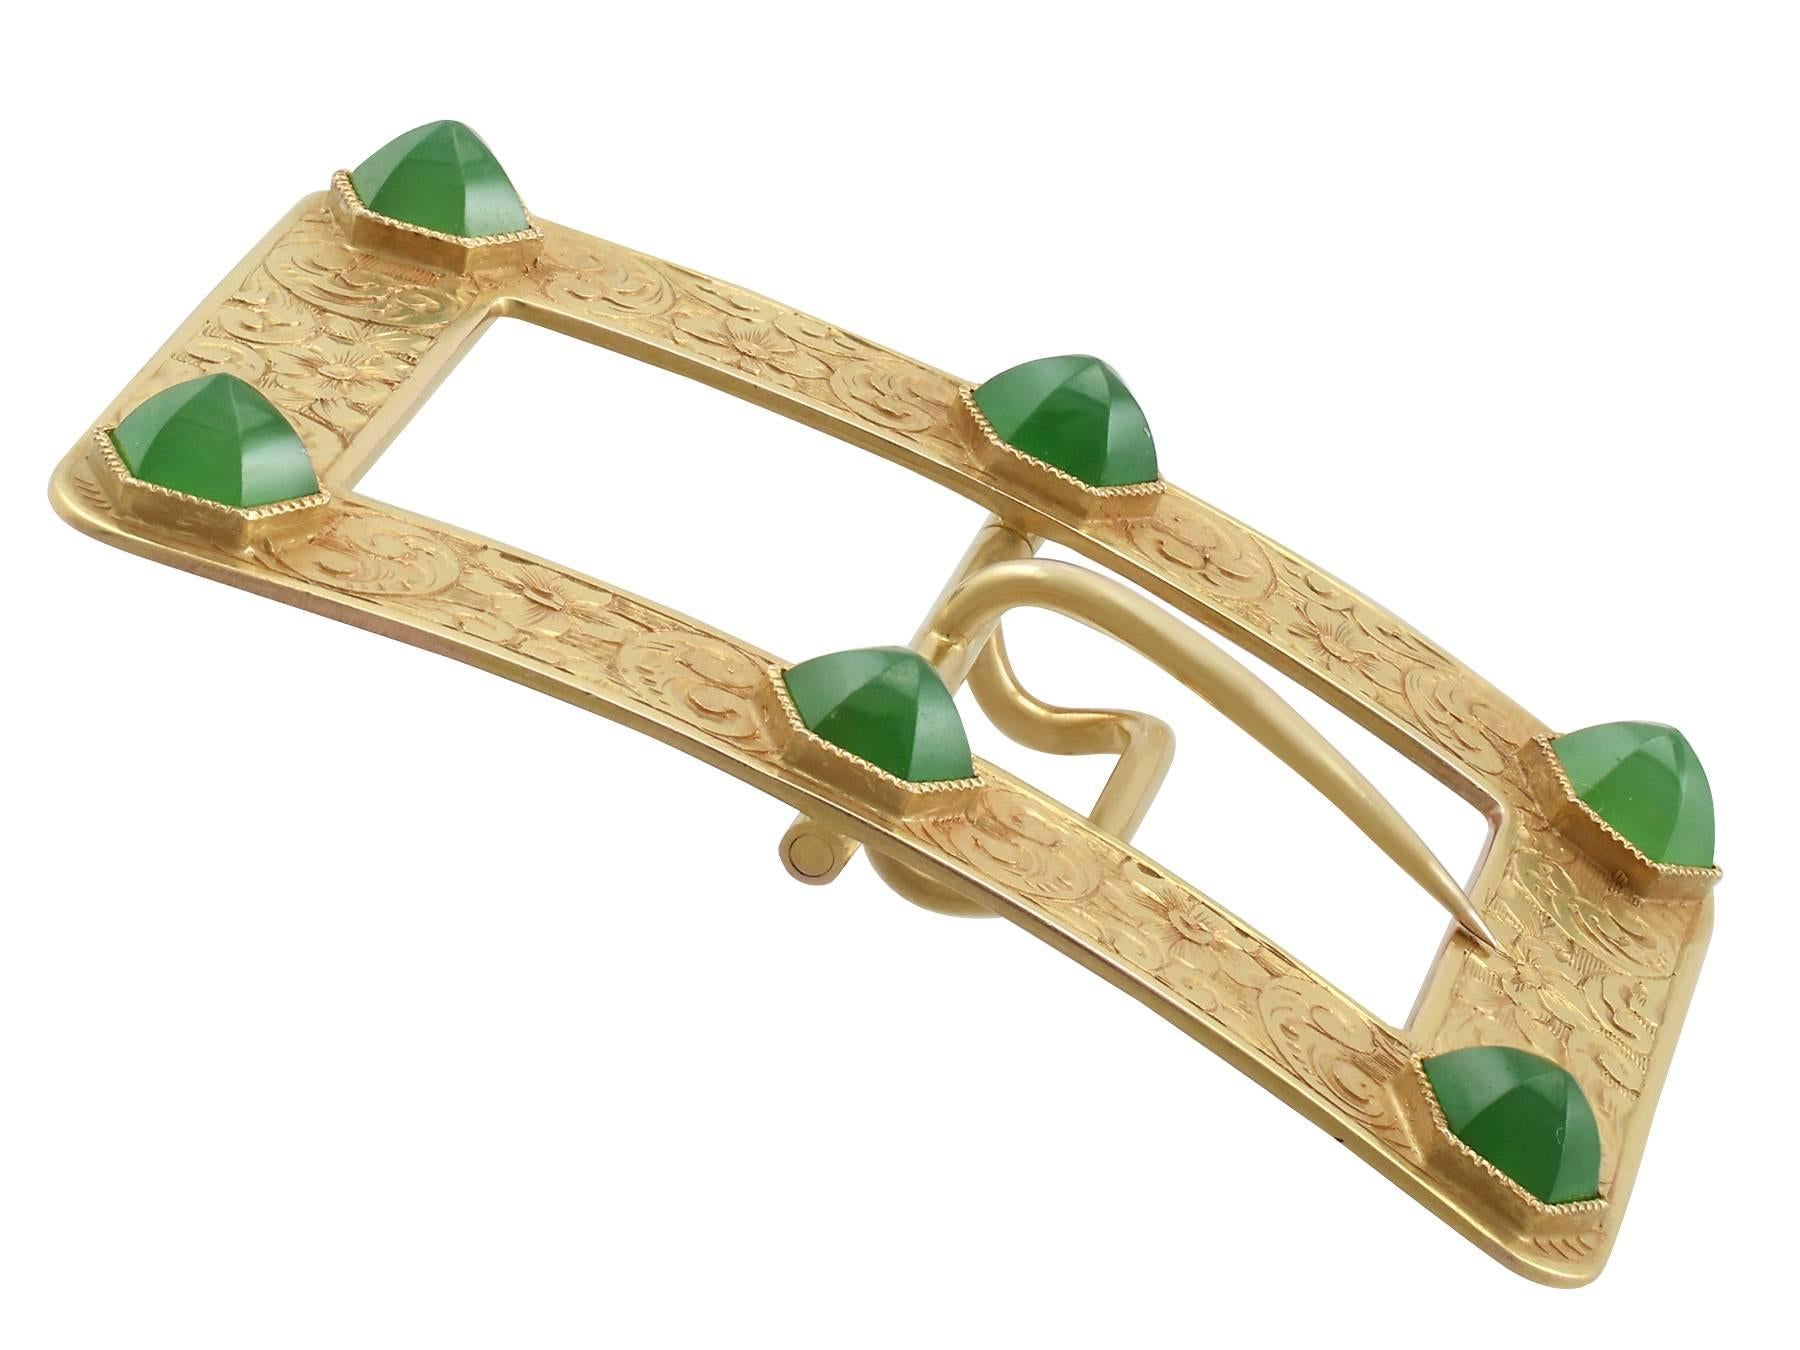 An exceptional Victorian 4.82 carat chrysoprase and 15 karat yellow gold belt buckle; part of our diverse antique jewelry and estate jewelry collections

This exceptional, fine and impressive Victorian belt buckle has been crafted in 15k yellow